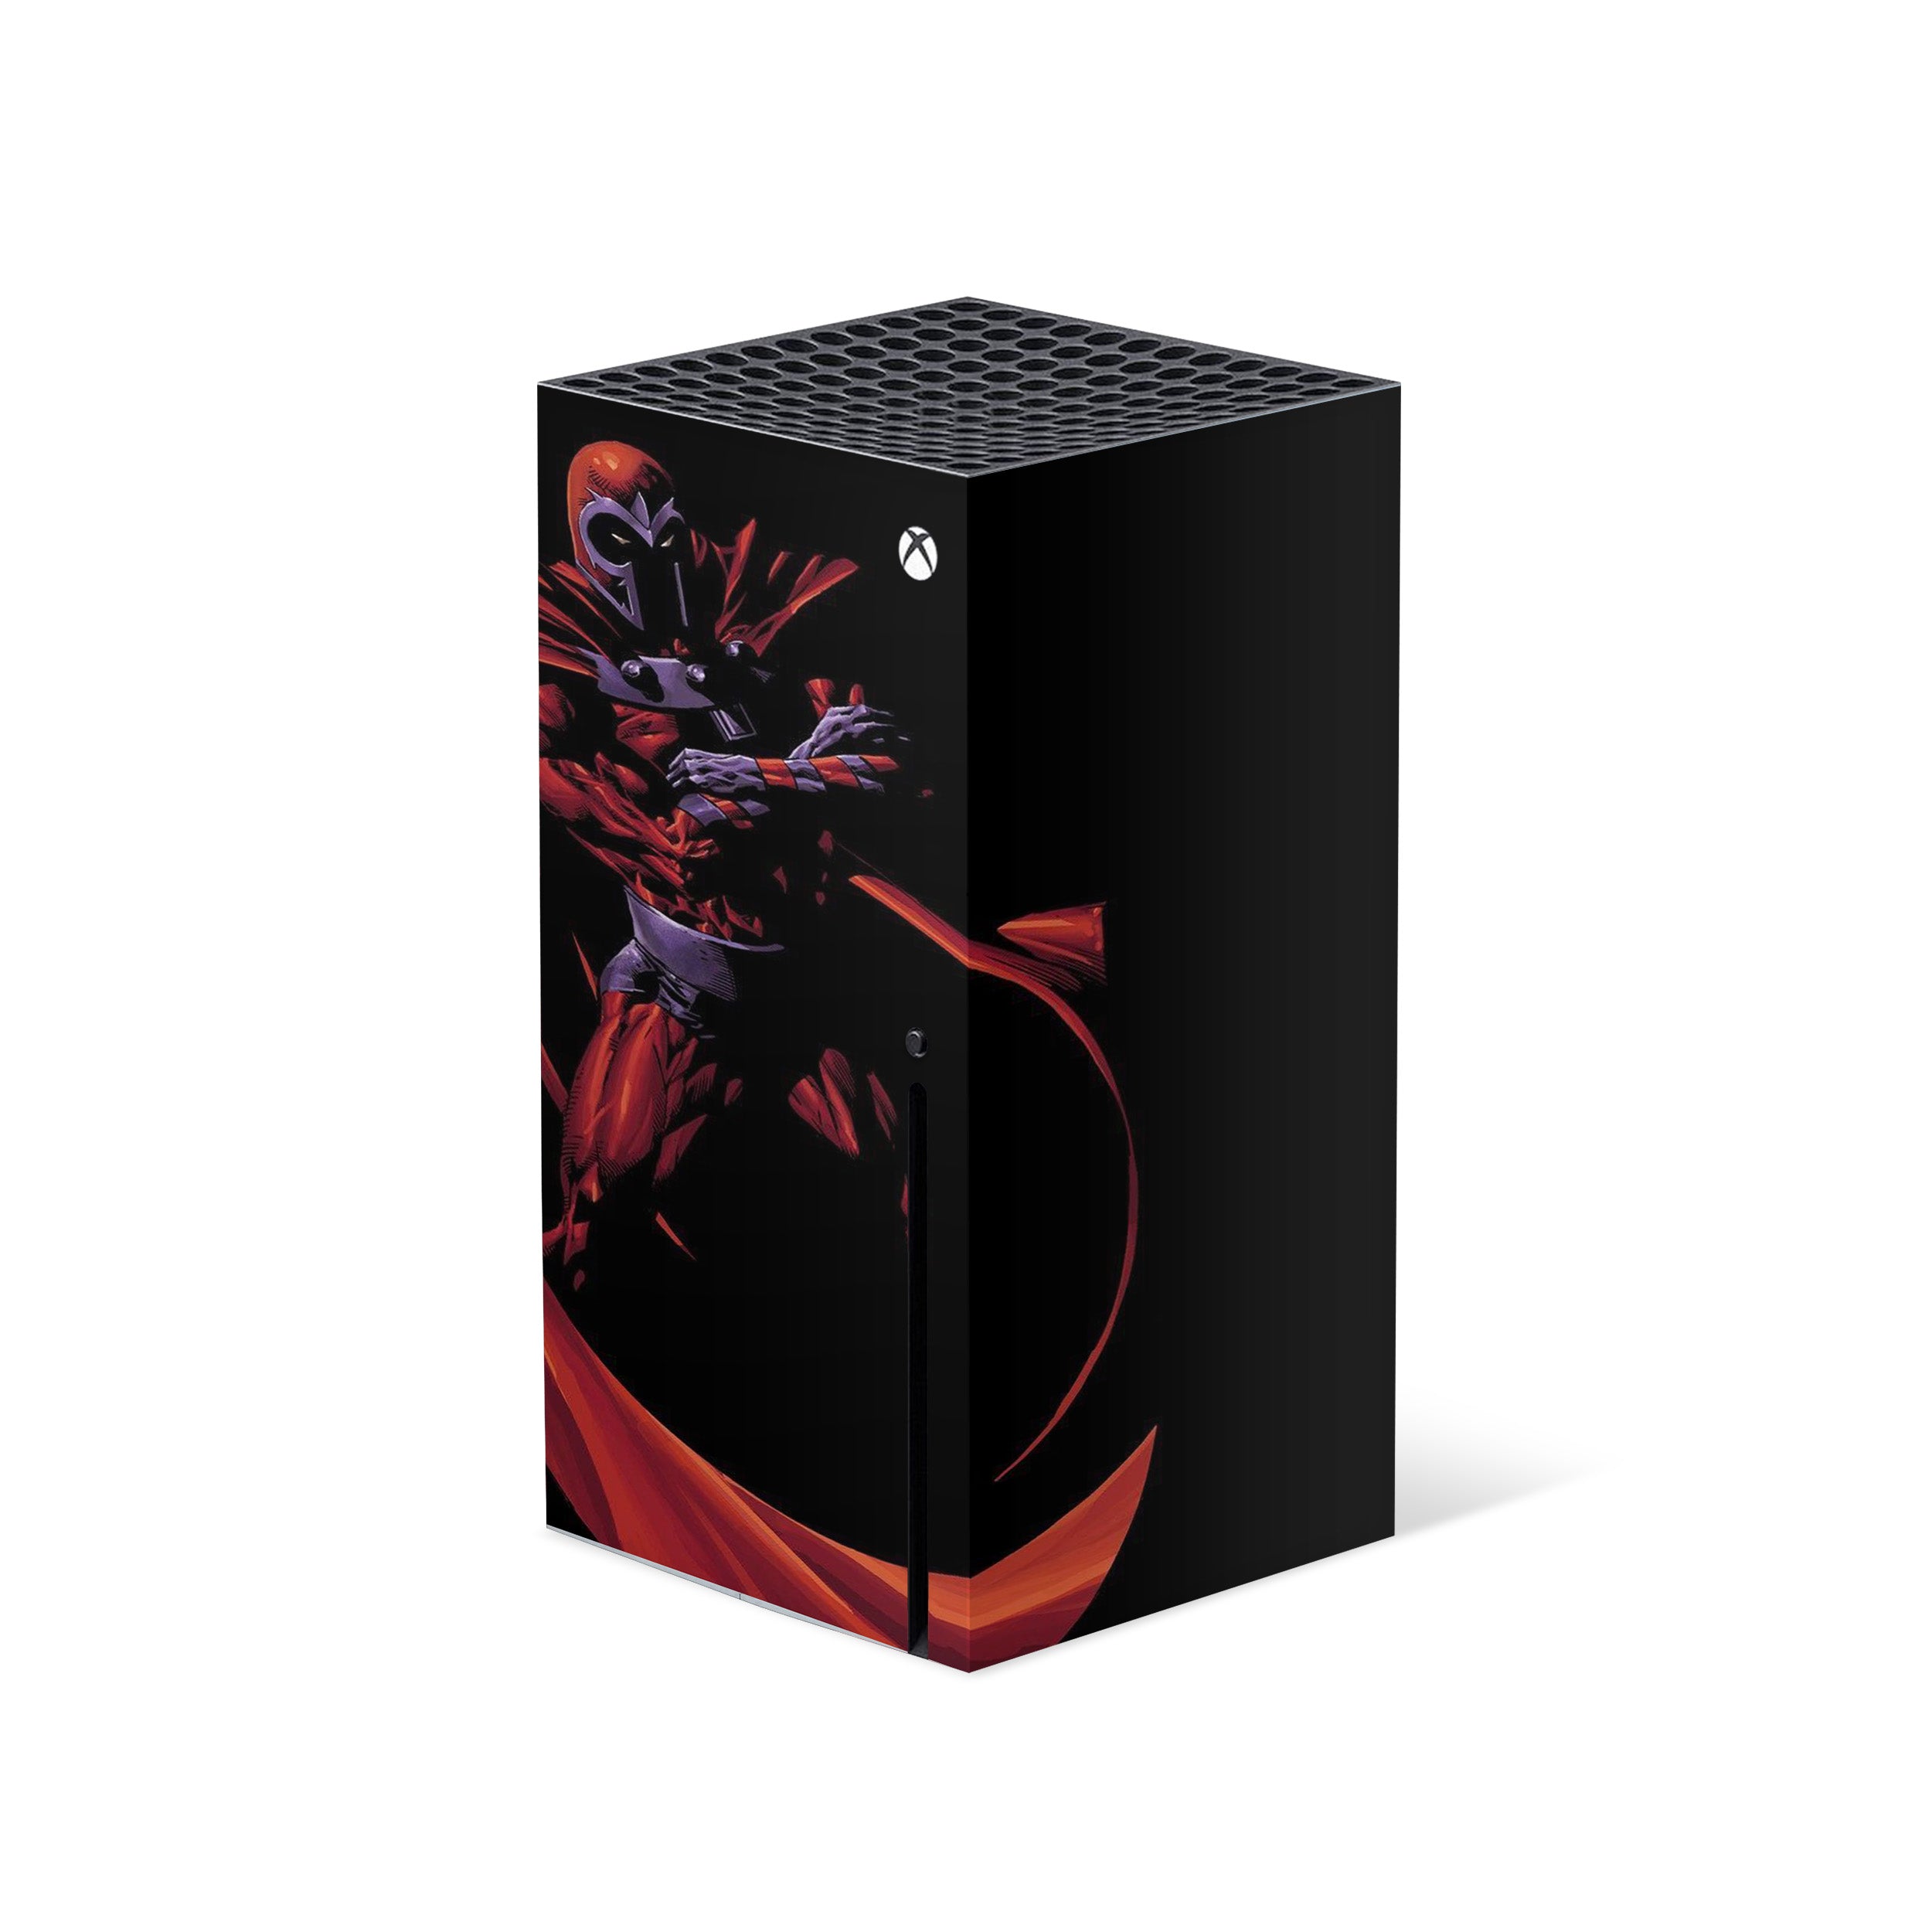 A video game skin featuring a Marvel X Men Magneto design for the Xbox Series X.